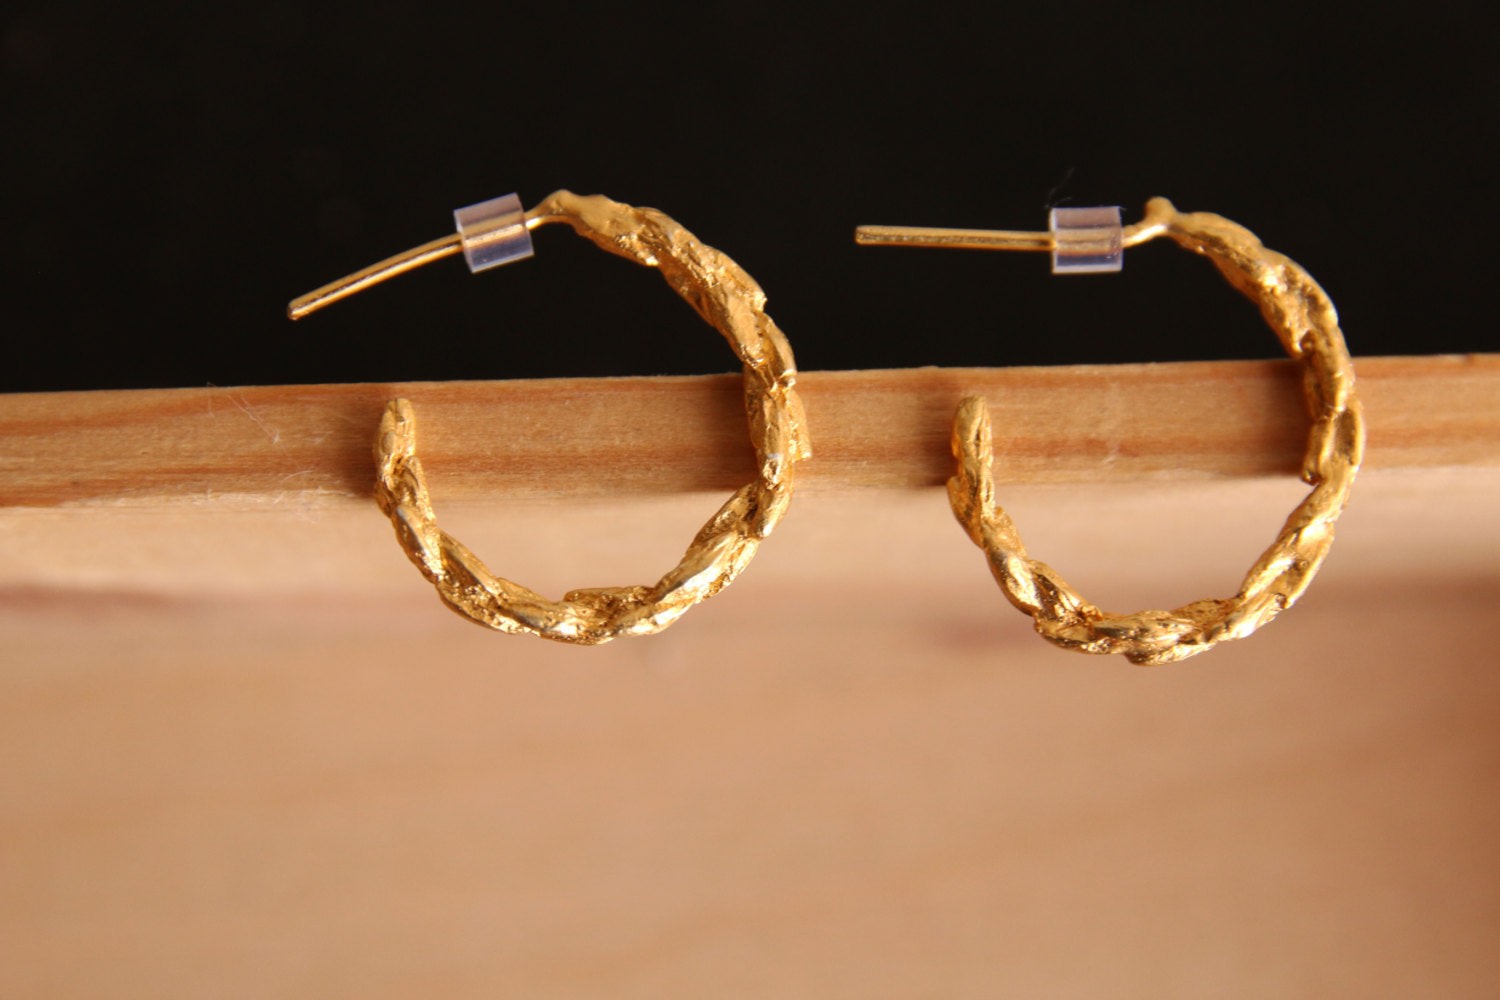 Gold-plated botanical hoop earrings, Nature inspired jewelry, Small Nature hoops